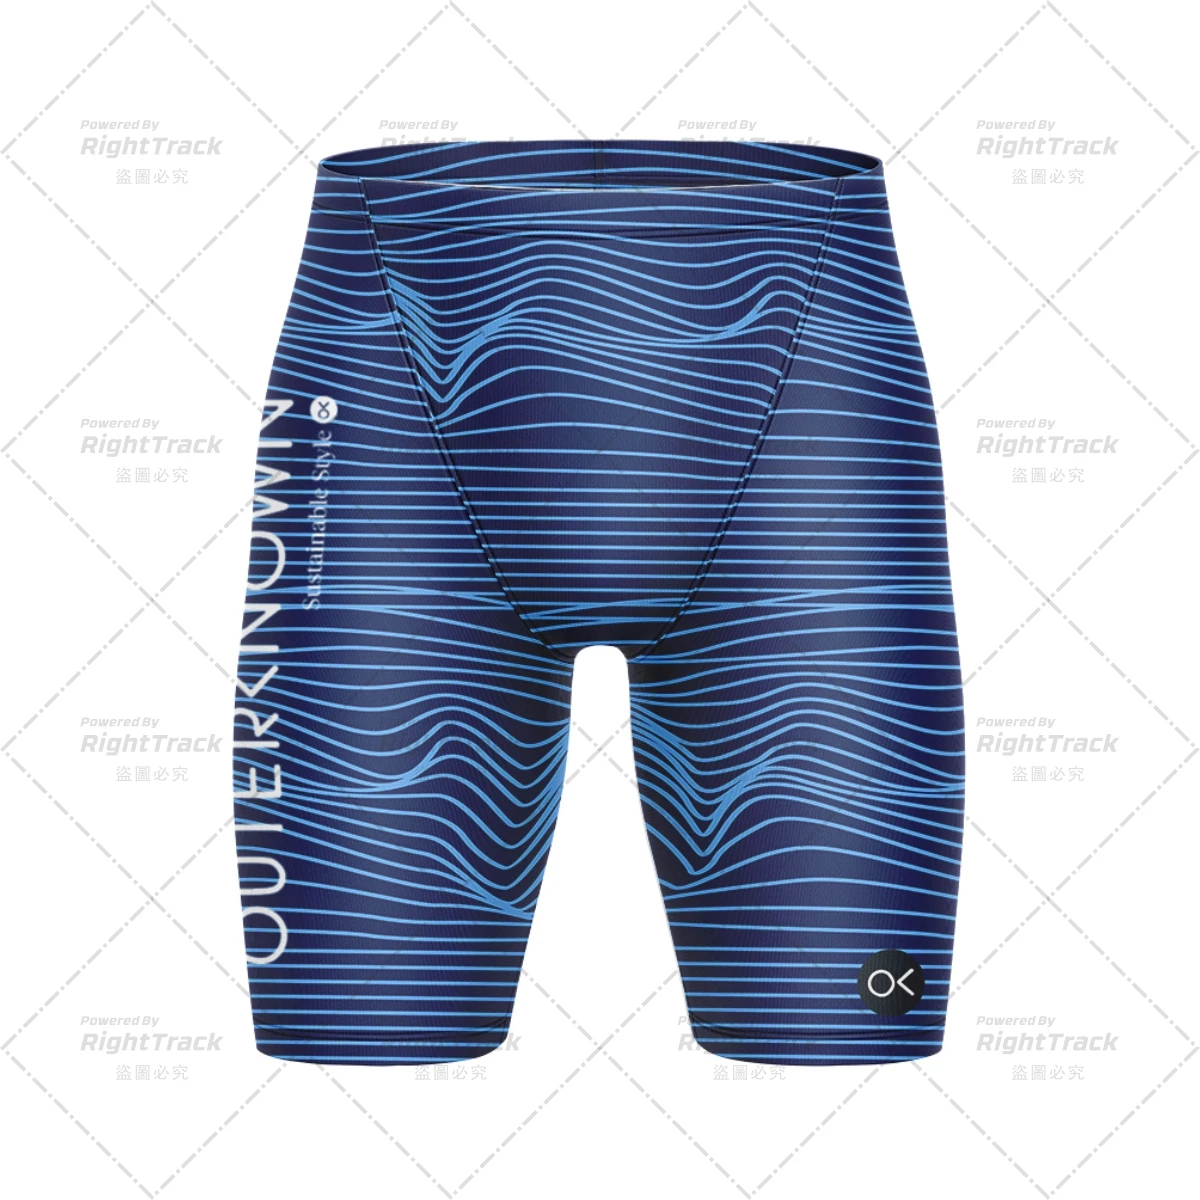 Outerknown Surf Shorts Summer Unisex Tight-fitting Surfing Bottoms Performance Trunks Beach Swimsuit OK Swim Pants